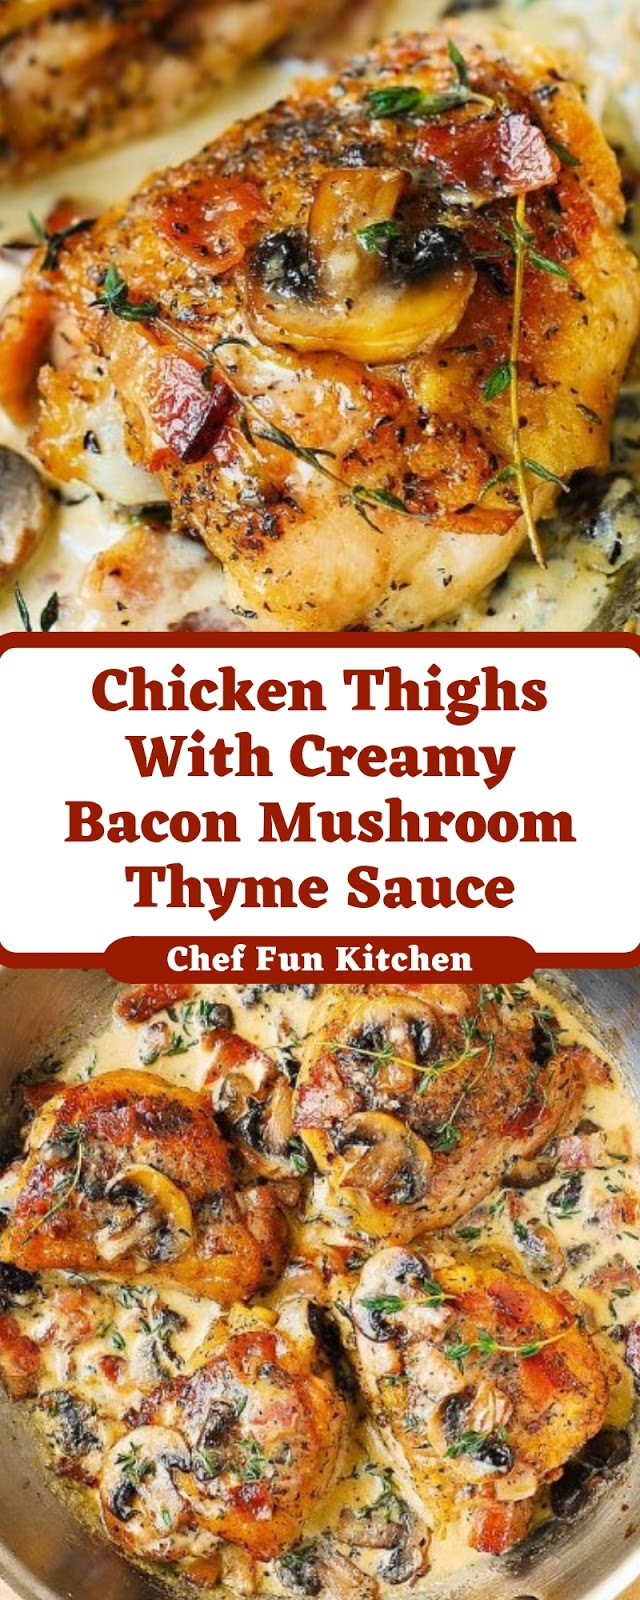 Chicken Thighs With Creamy Bacon Mushroom Thyme Sauce